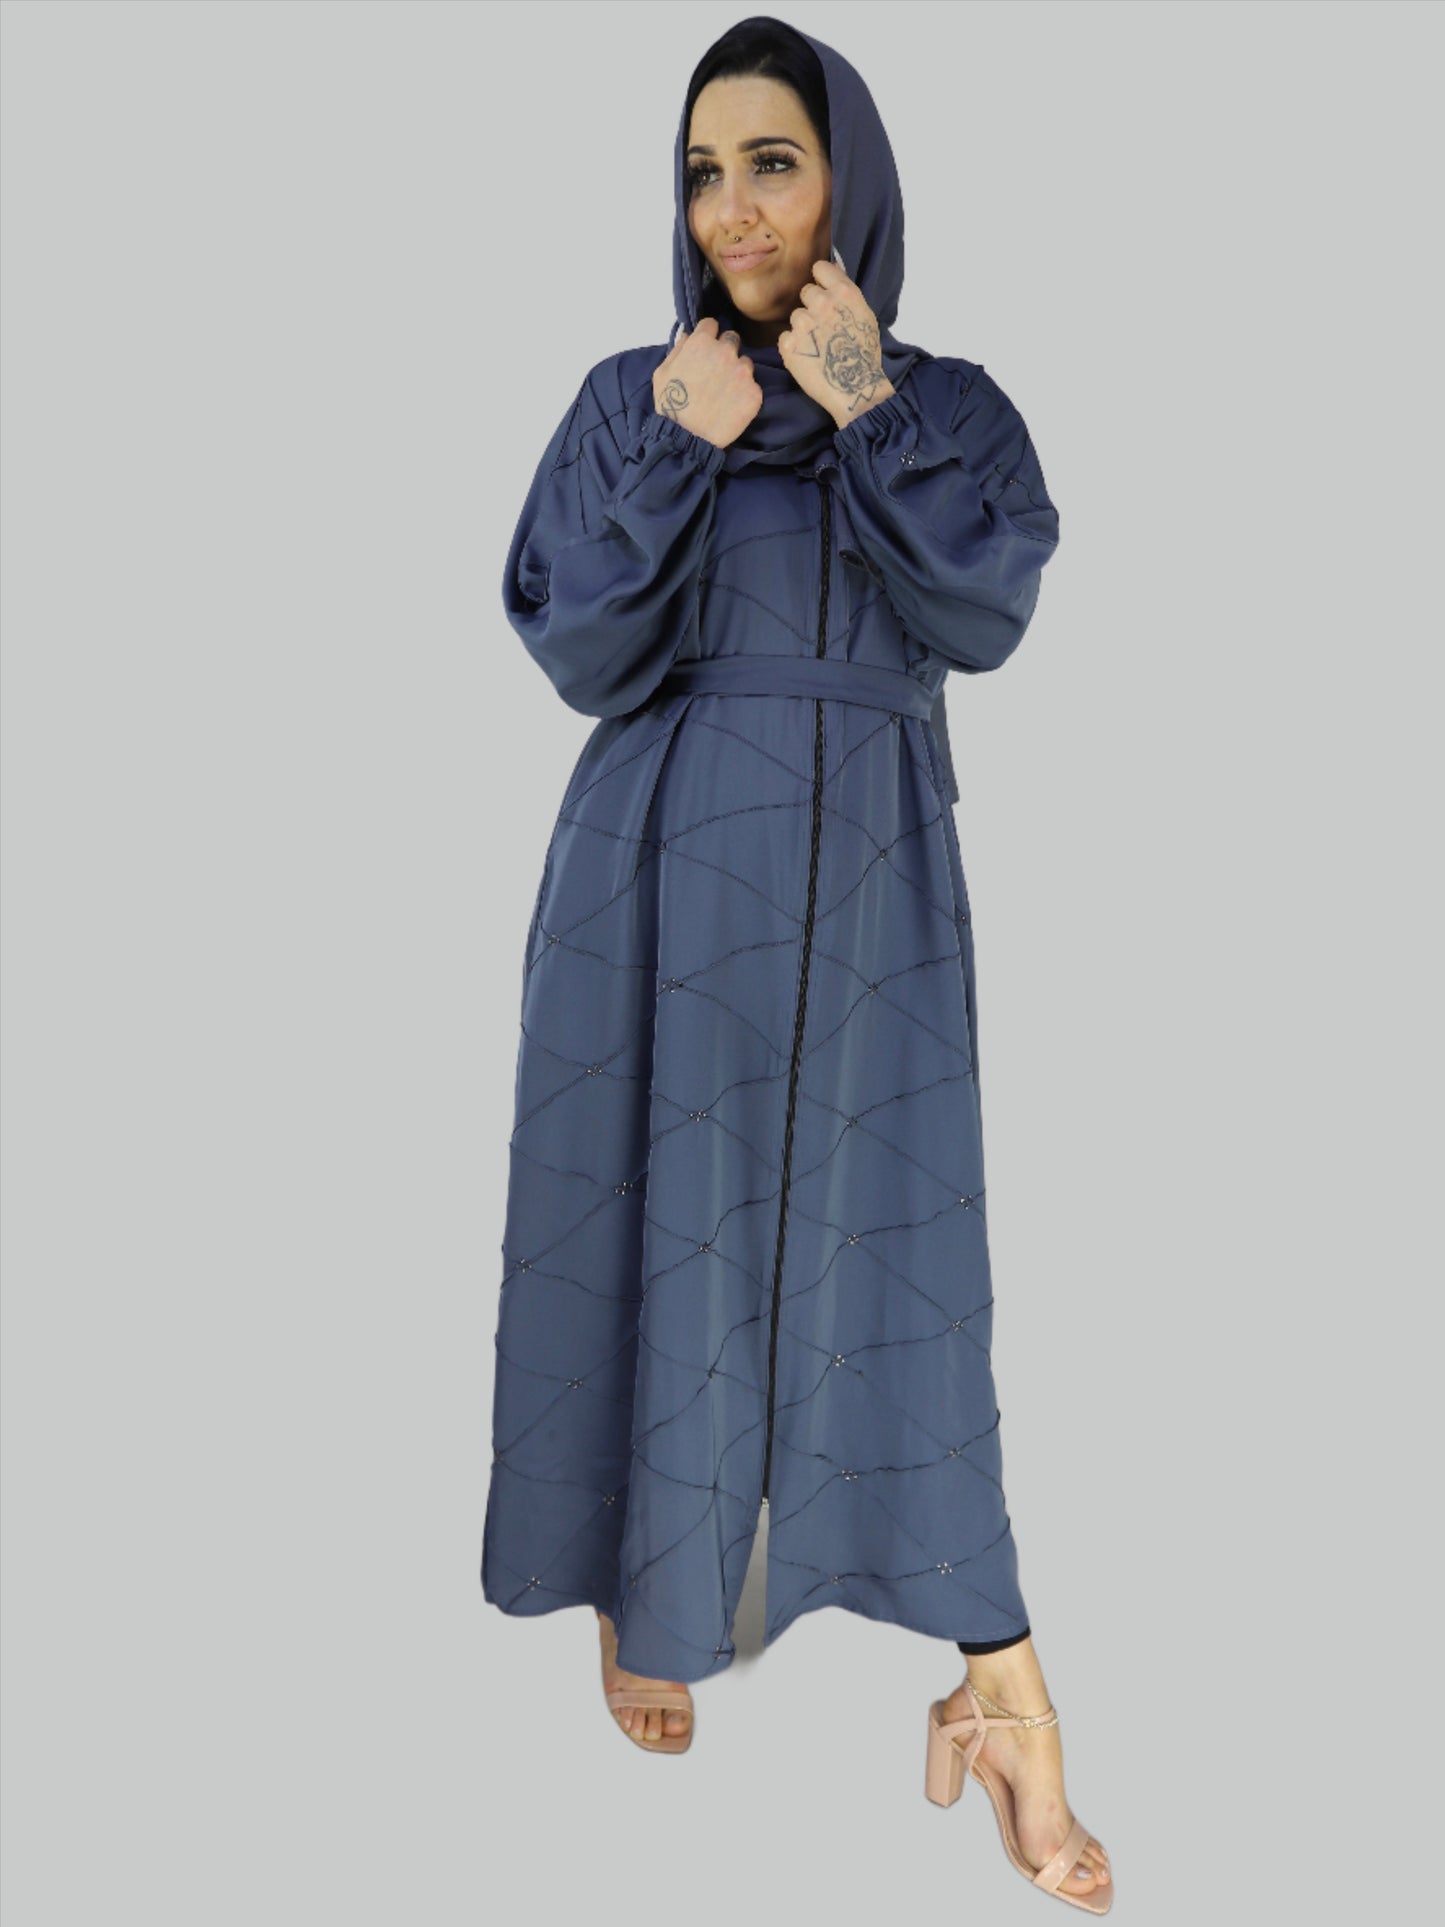 Blue Color abaya with zip going down, modest Abaya For Women,abaya abayas modest abaya dress modest dresses black abaya modest dress abaya united kingdom white abaya abaya for women modest dresses for women modest maxi dresses women abaya abaya dress dresses abayas for women jilbab abaya islamic clothing modest clothing for women modest clothing dresses